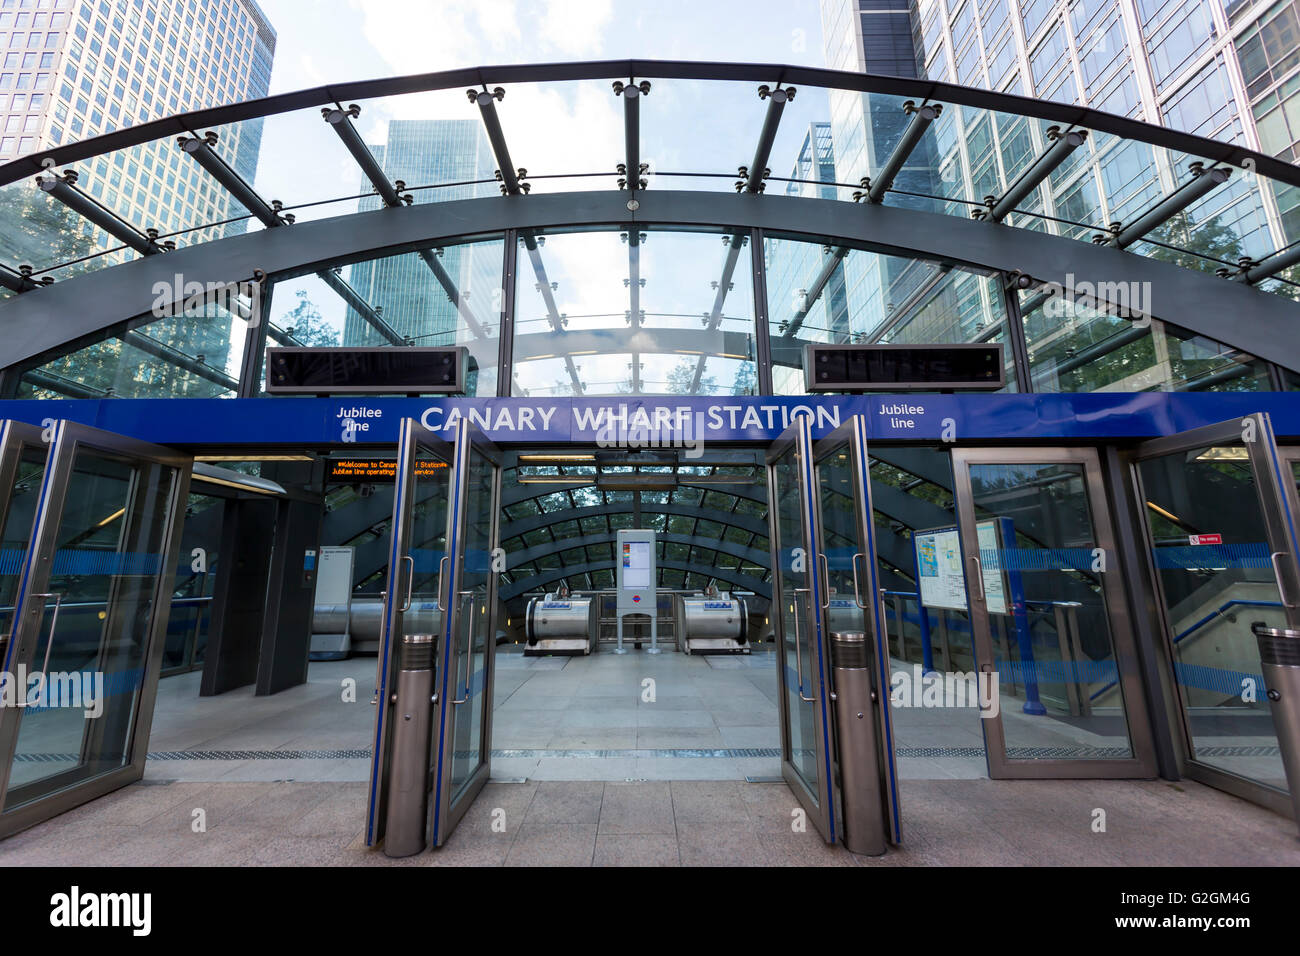 High tech glass roofed entrance of the Canary Wharf Underground Station in London Stock Photo